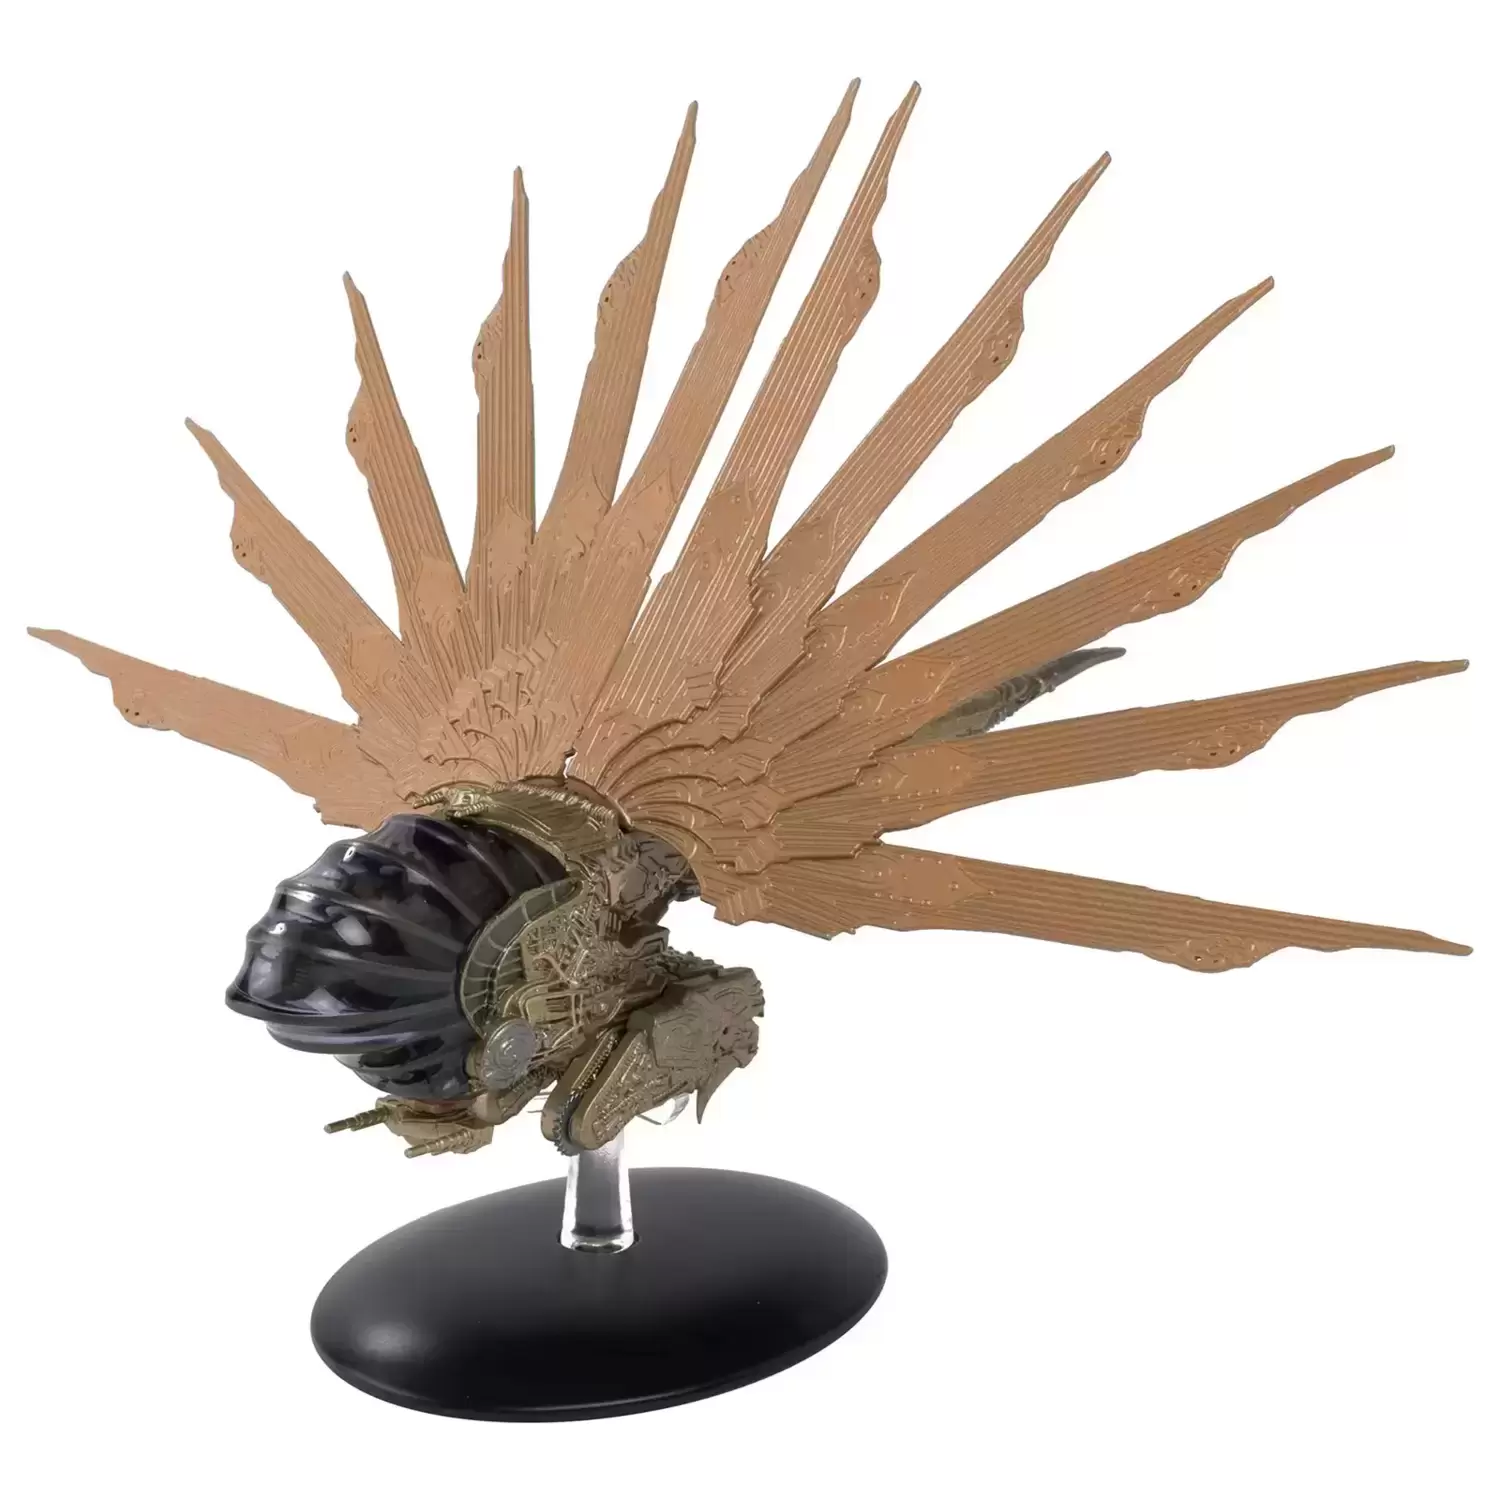 Star Trek Discovery The Official Starships Collection - Klingon Raider